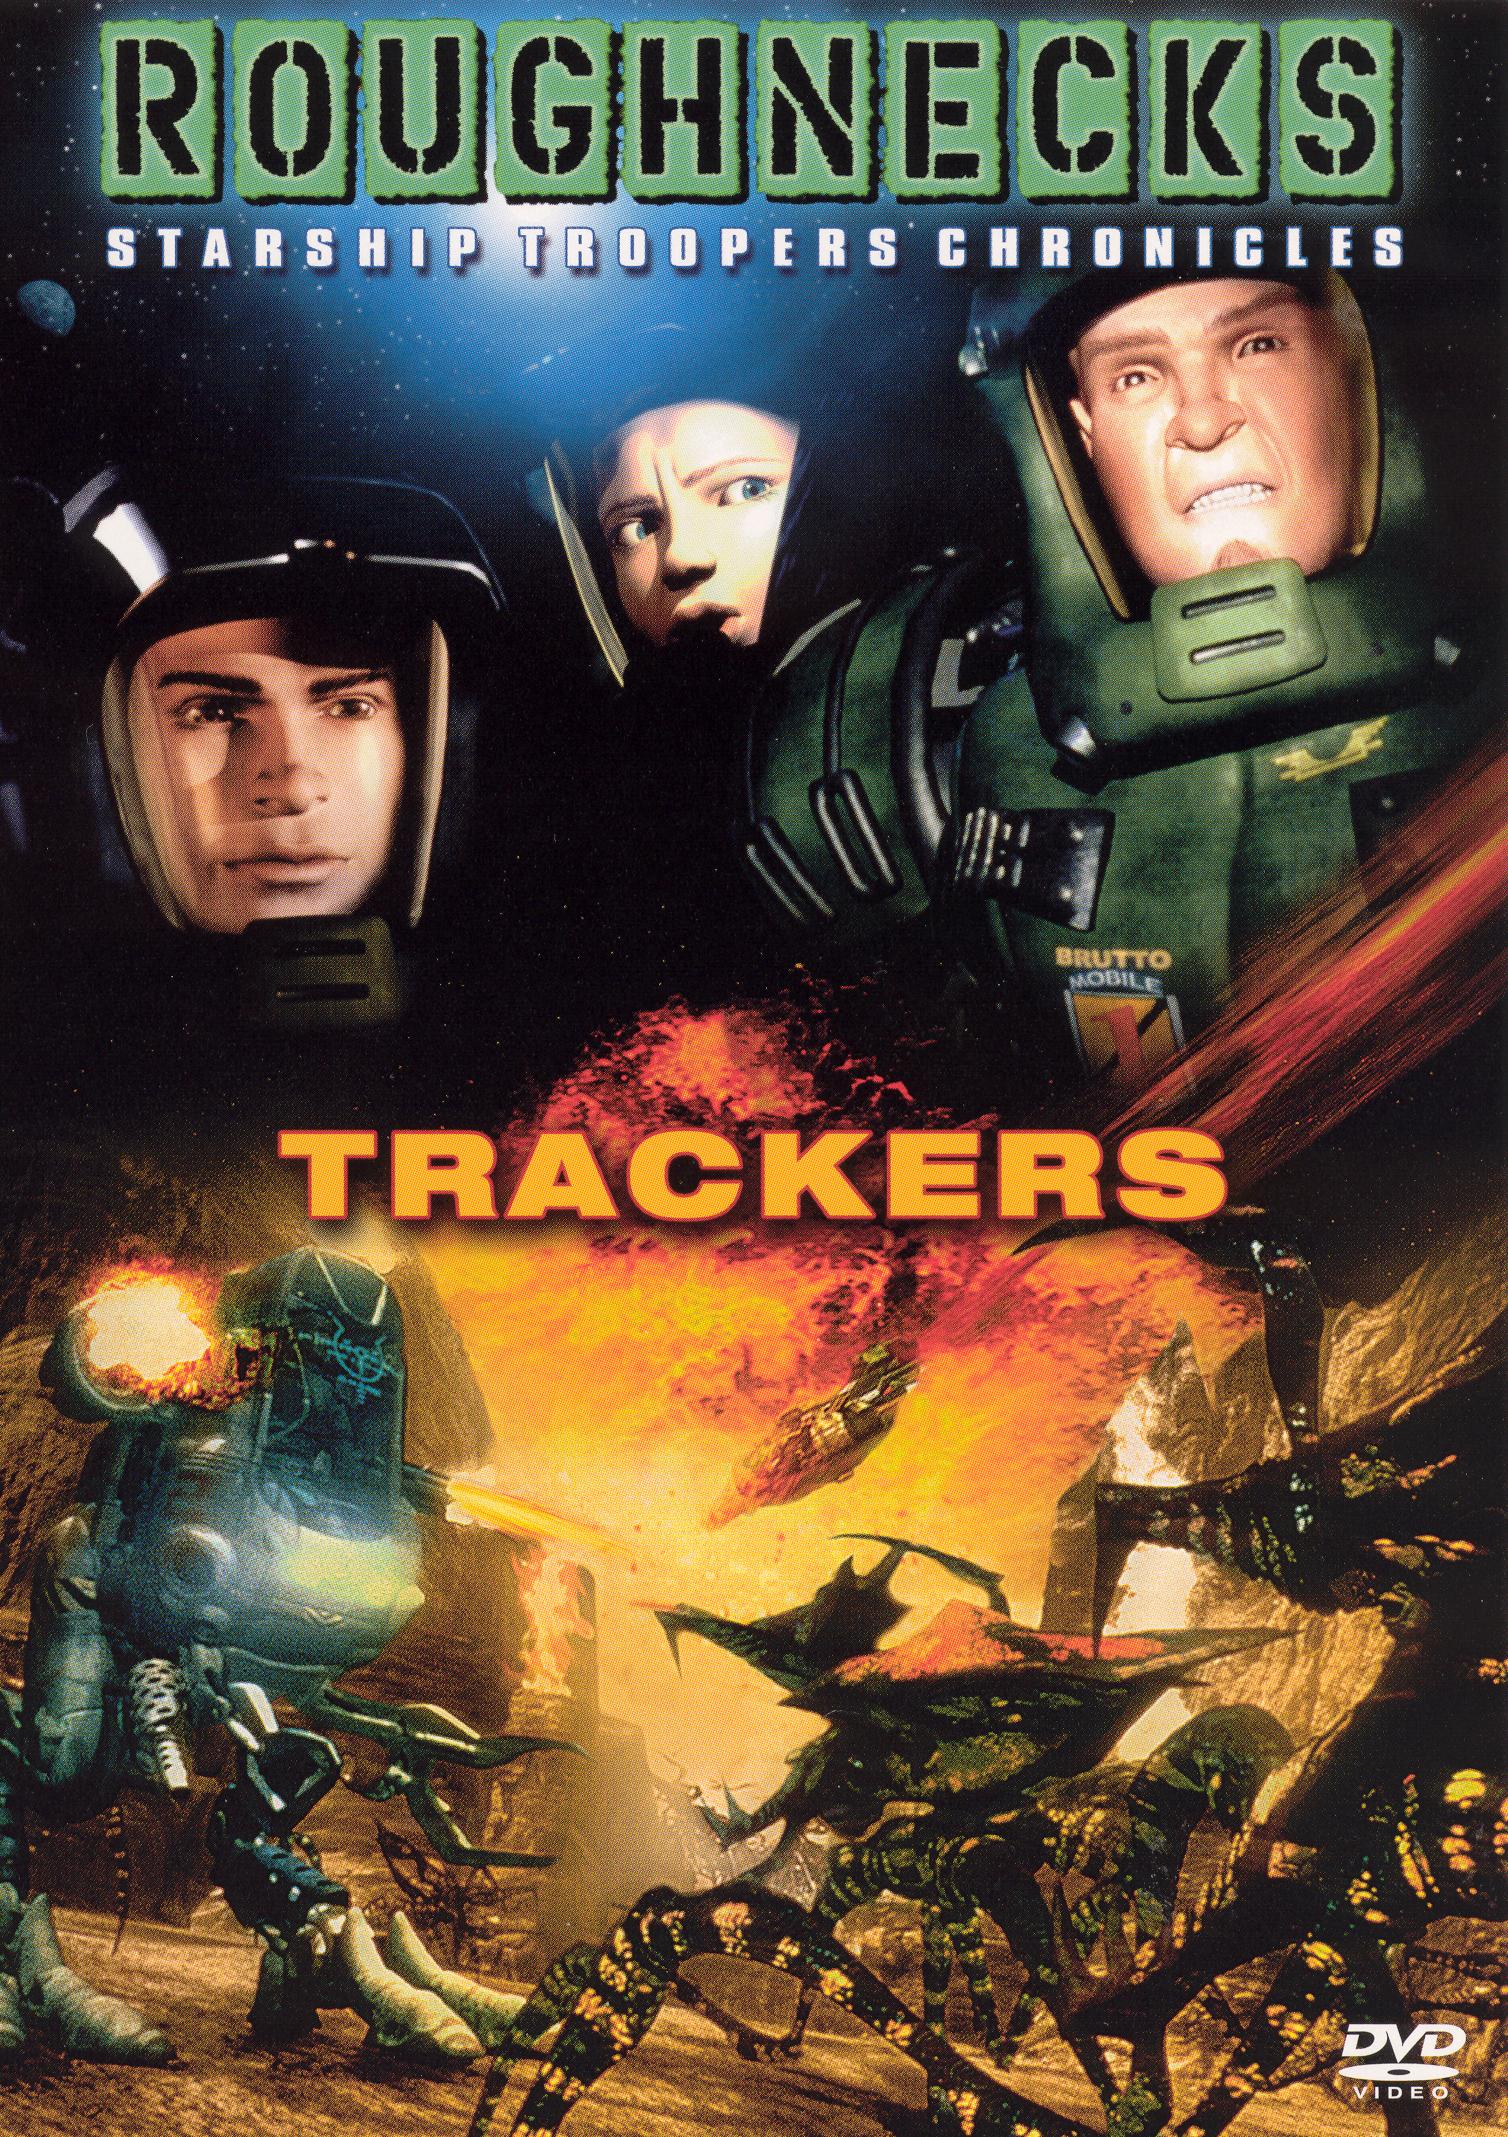 roughnecks starship troopers chronicles